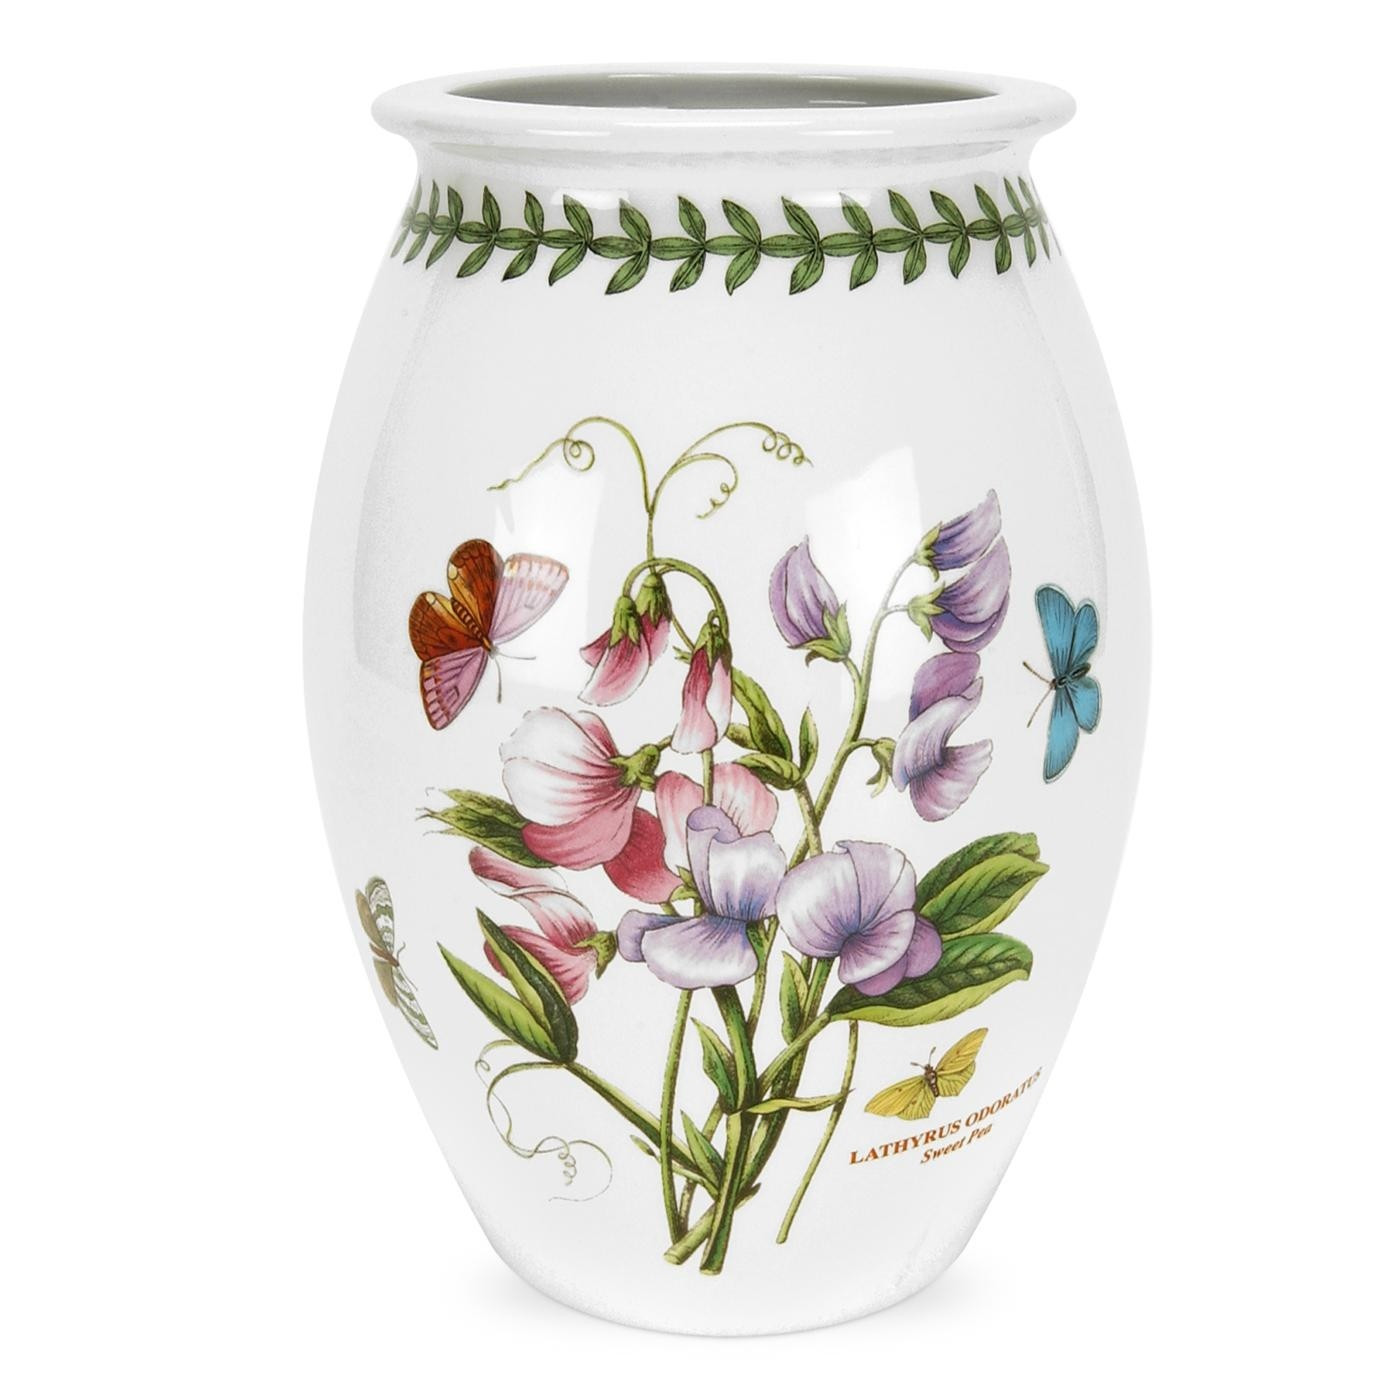 27 Stylish Polonia Lead Crystal Vase 2024 free download polonia lead crystal vase of portmeirion botanic garden seconds 9 inch sovereign vase large no for portmeirion botanic garden seconds 9 inch sovereign vase large no guarantee of flower desig